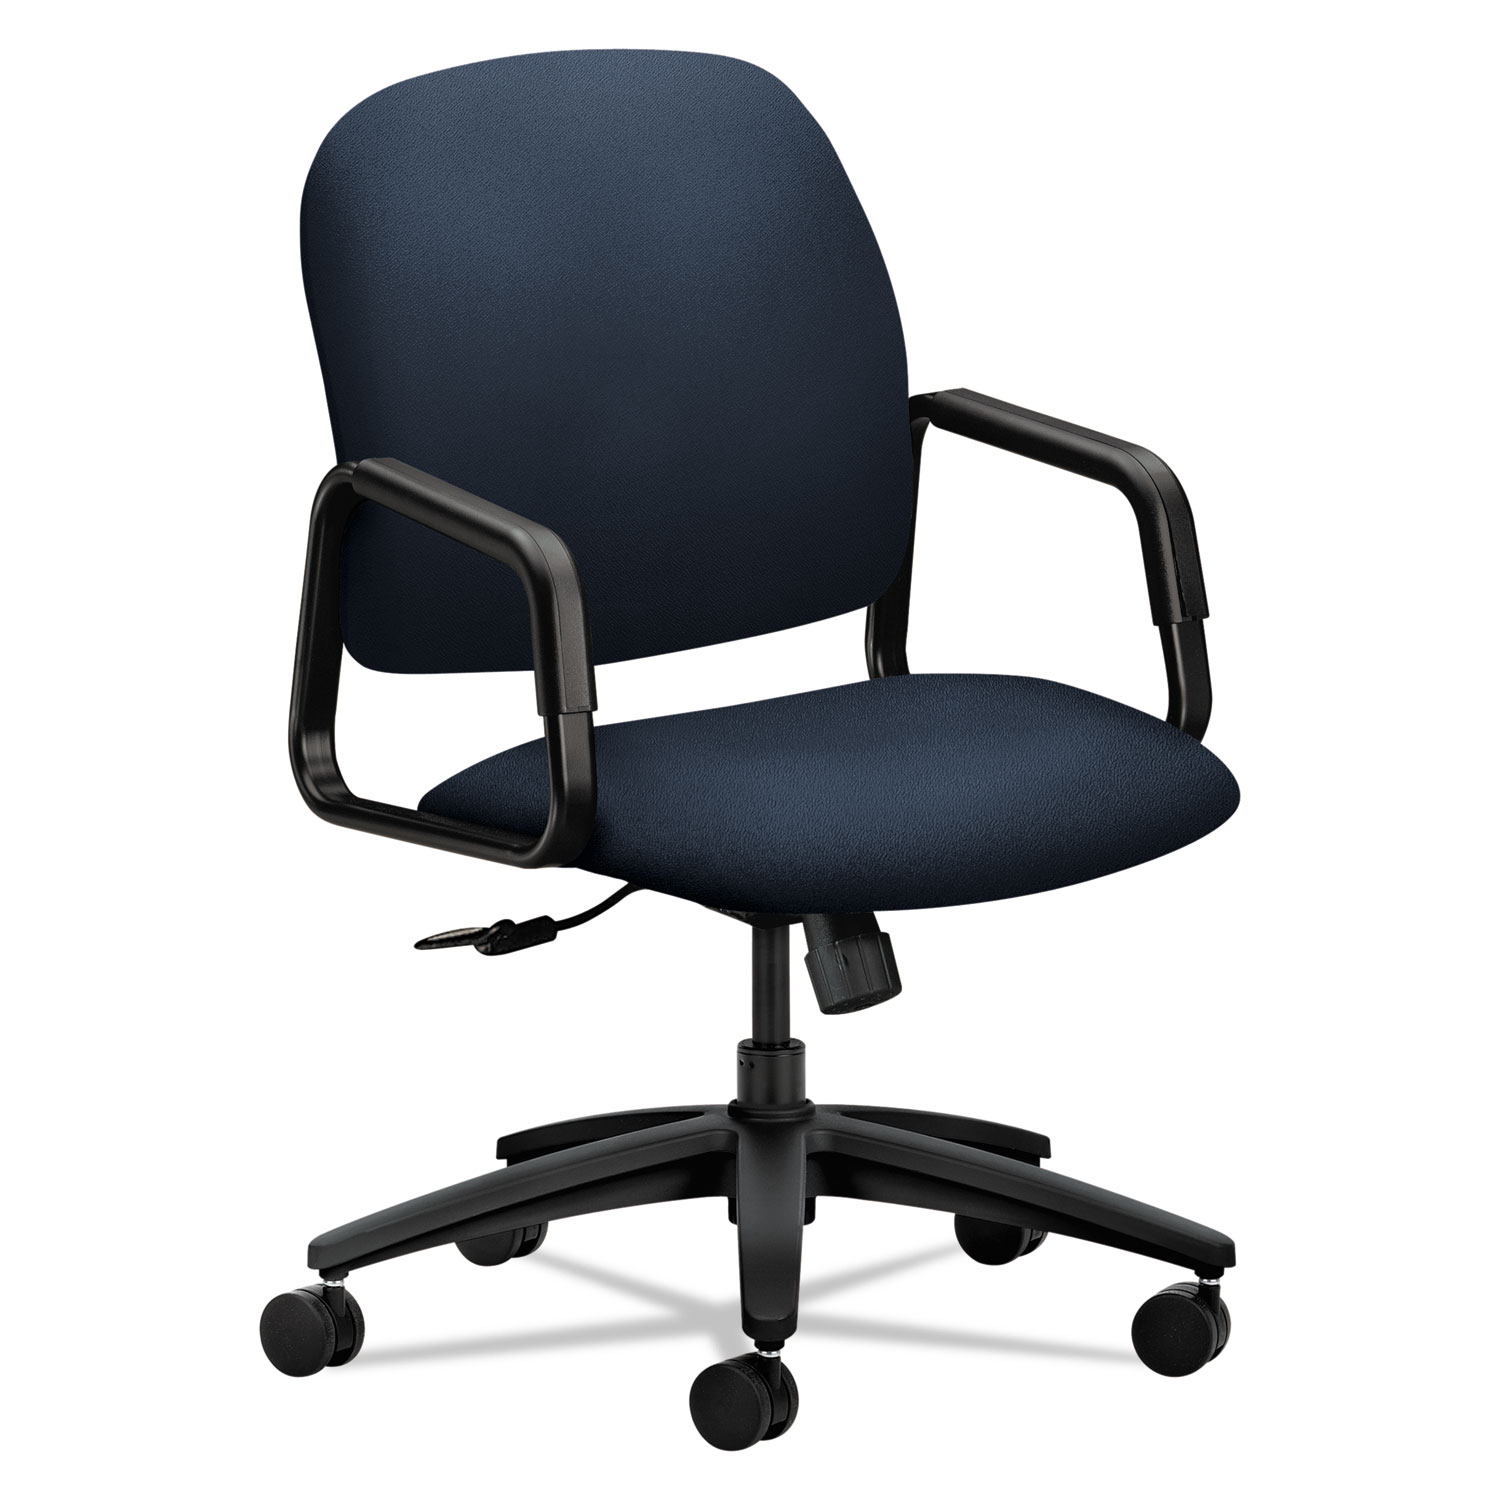 Solutions Seating 4000 Series Executive High-Back Chair, Supports up to 250 lbs., Navy Seat, Navy Back, Black Base